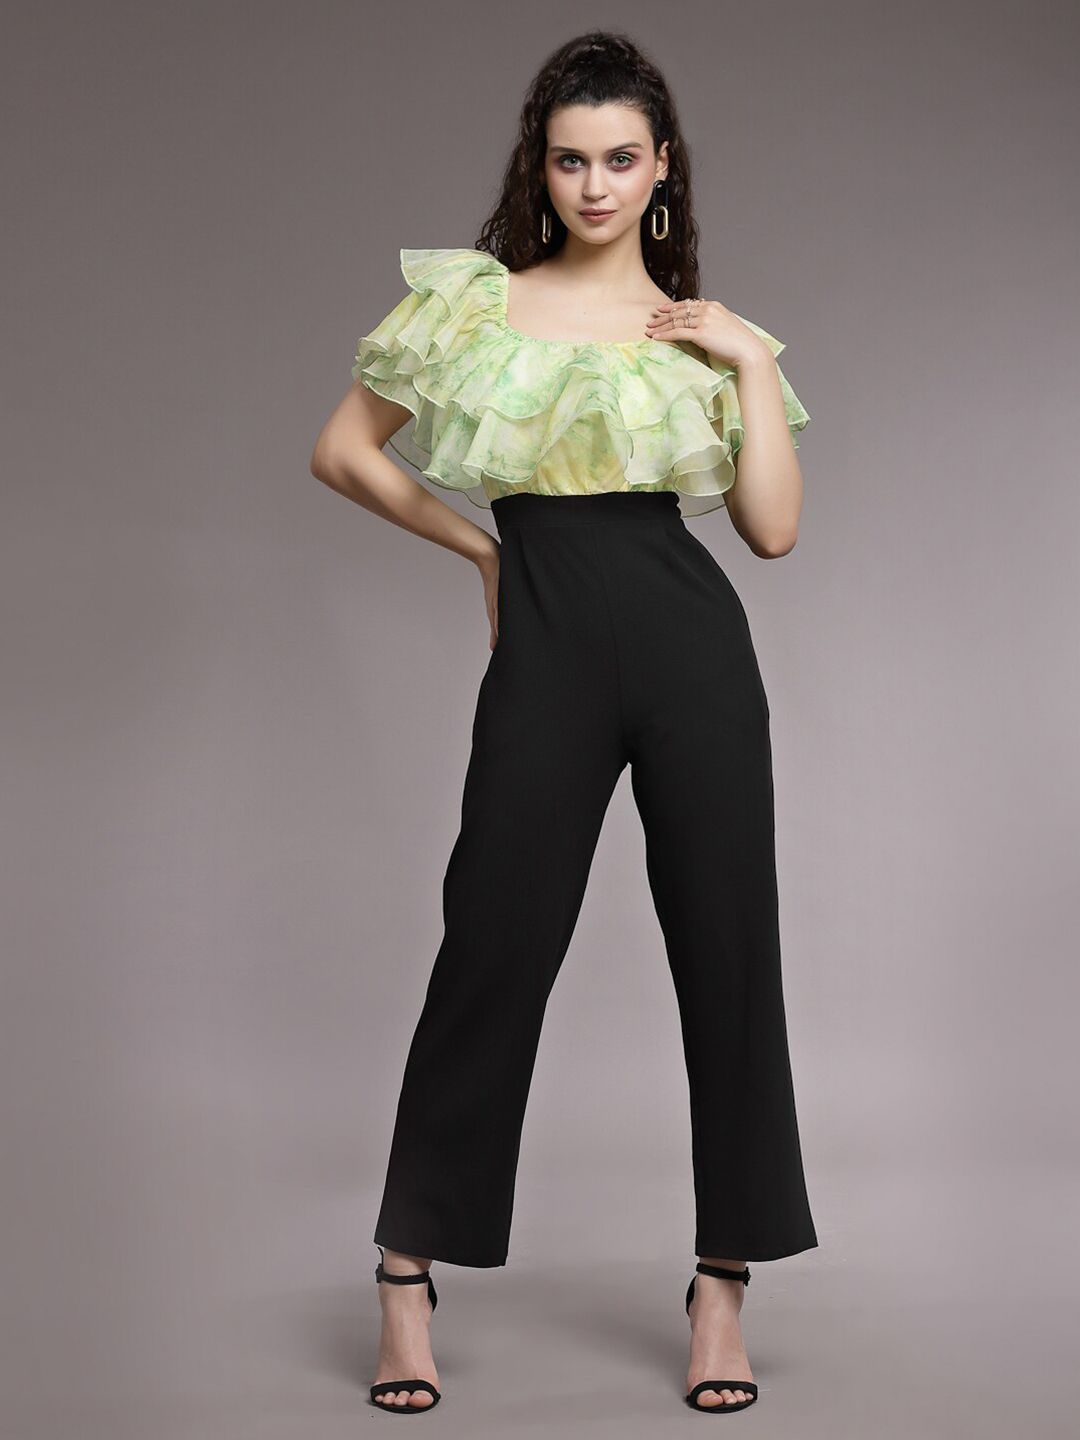 KASSUALLY Green & Black Printed Basic Jumpsuit with Ruffles Price in India